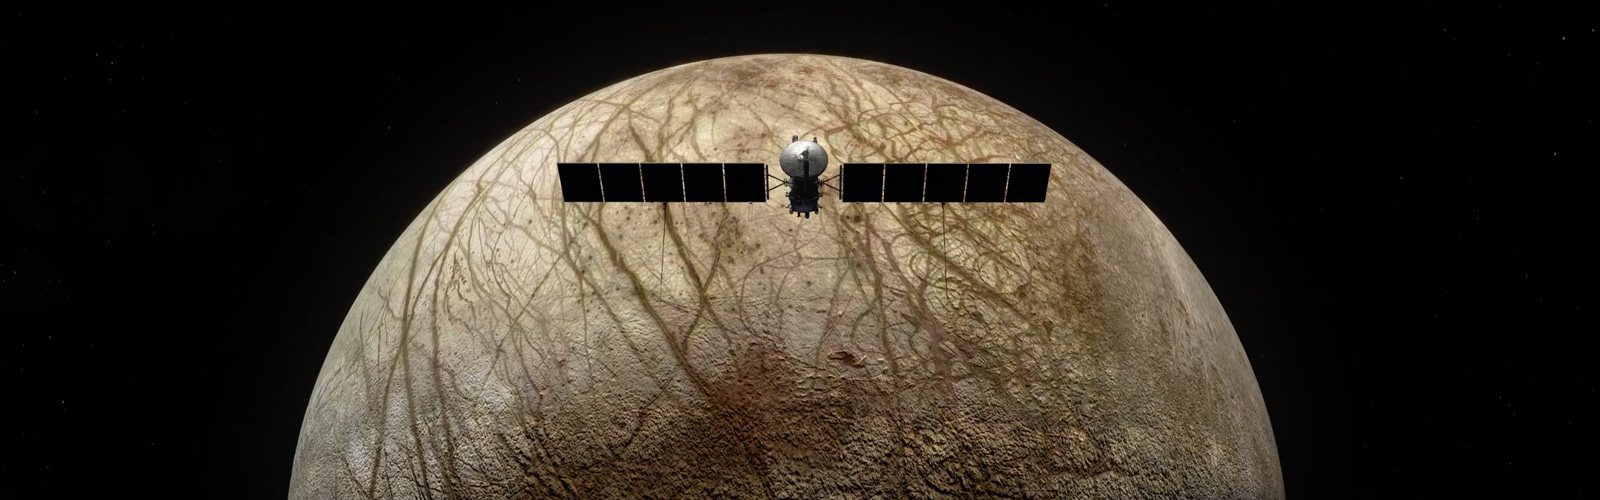 Jupiter's moon Europa with an illustration of the Europa Clipper spacecraft in front of it.